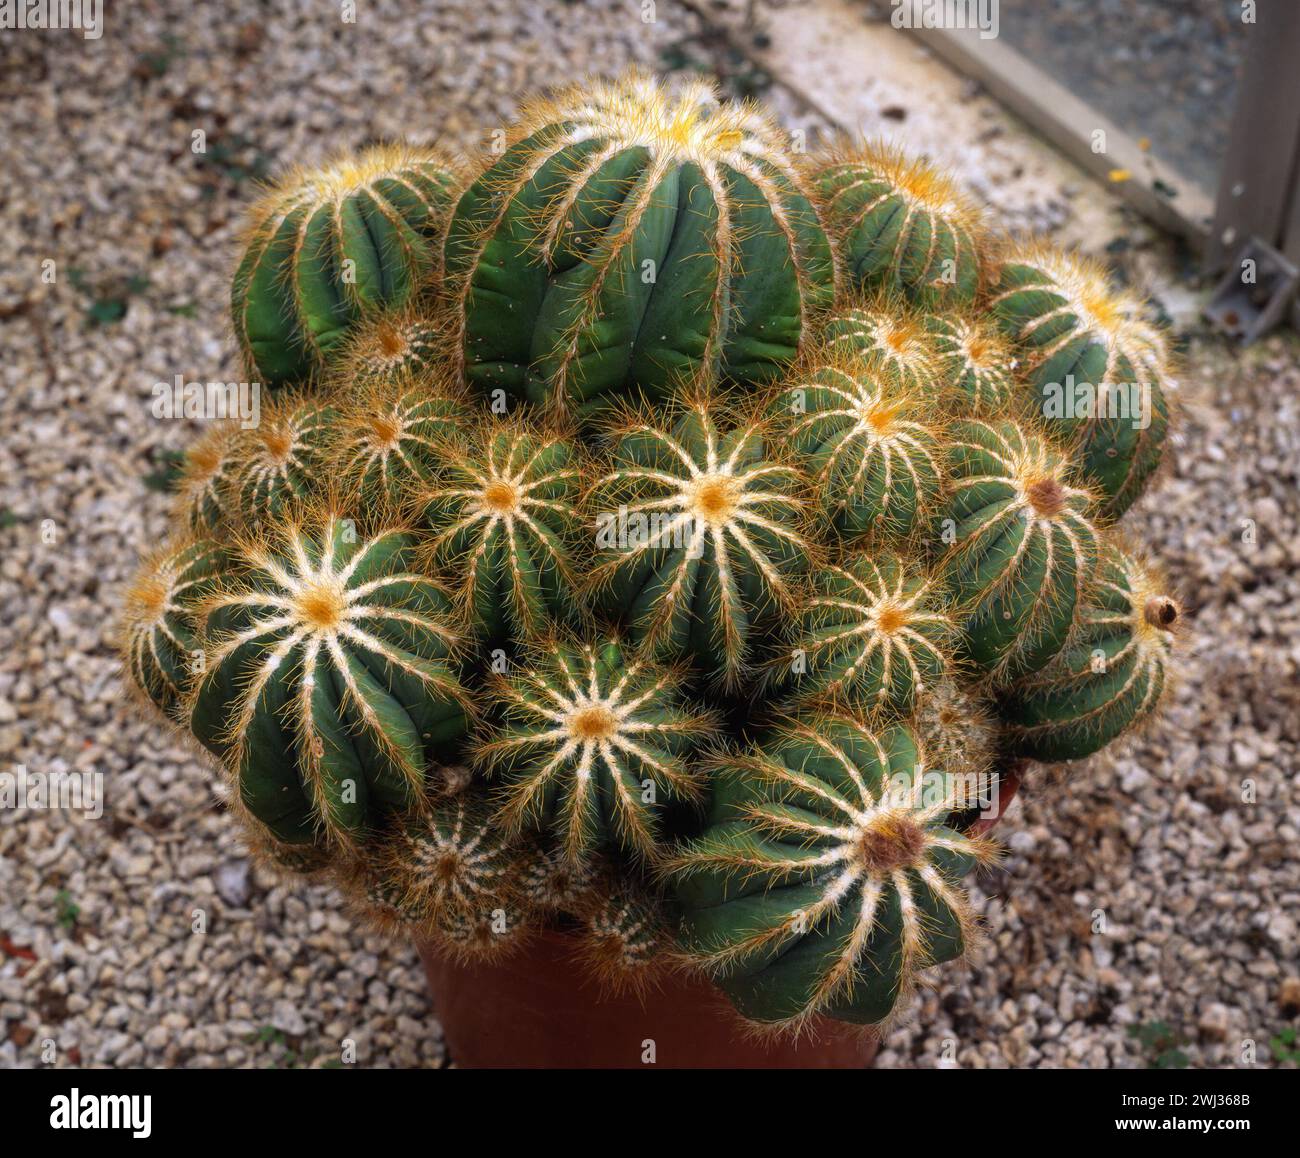 Notocactus magnificus (magnificent ball cactus) growing in pot standing on fine gravel / grit bed, England, UK Stock Photo